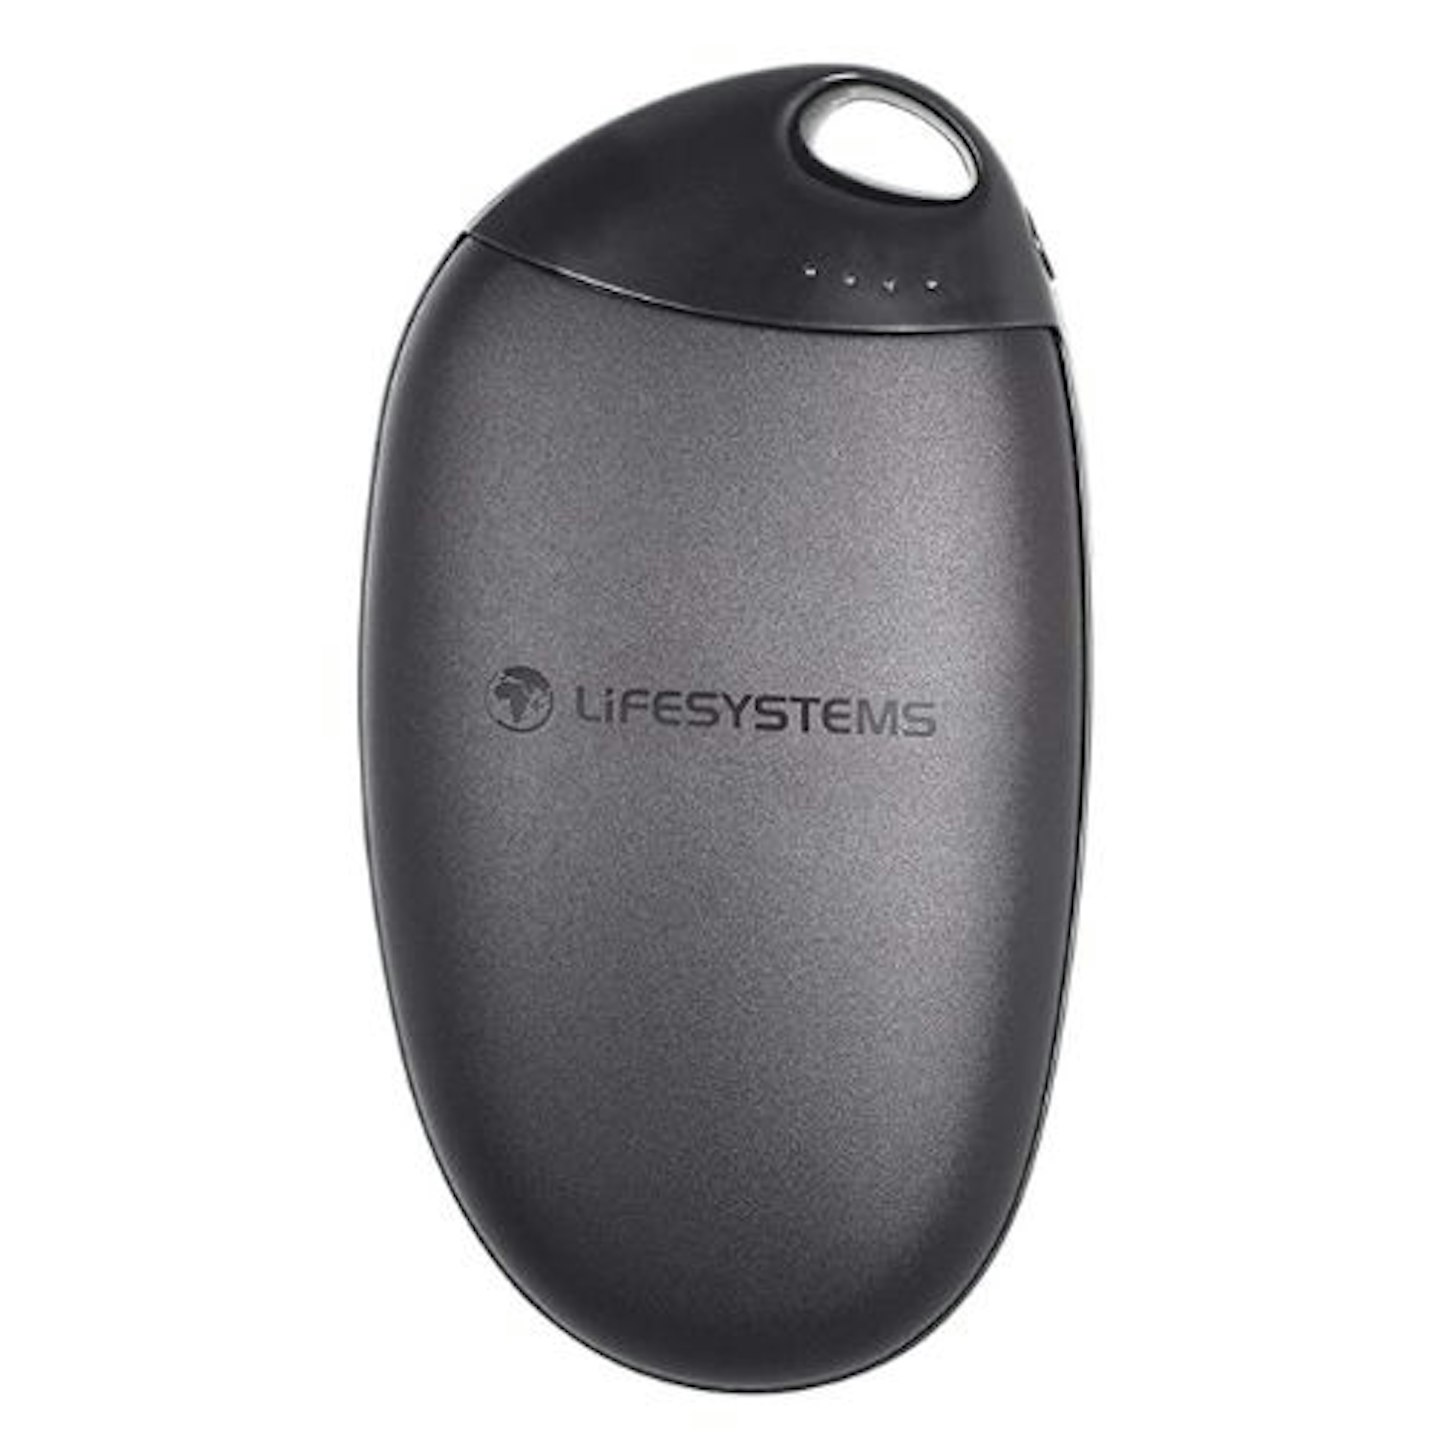 Lifesystems Electric Hand Warmer